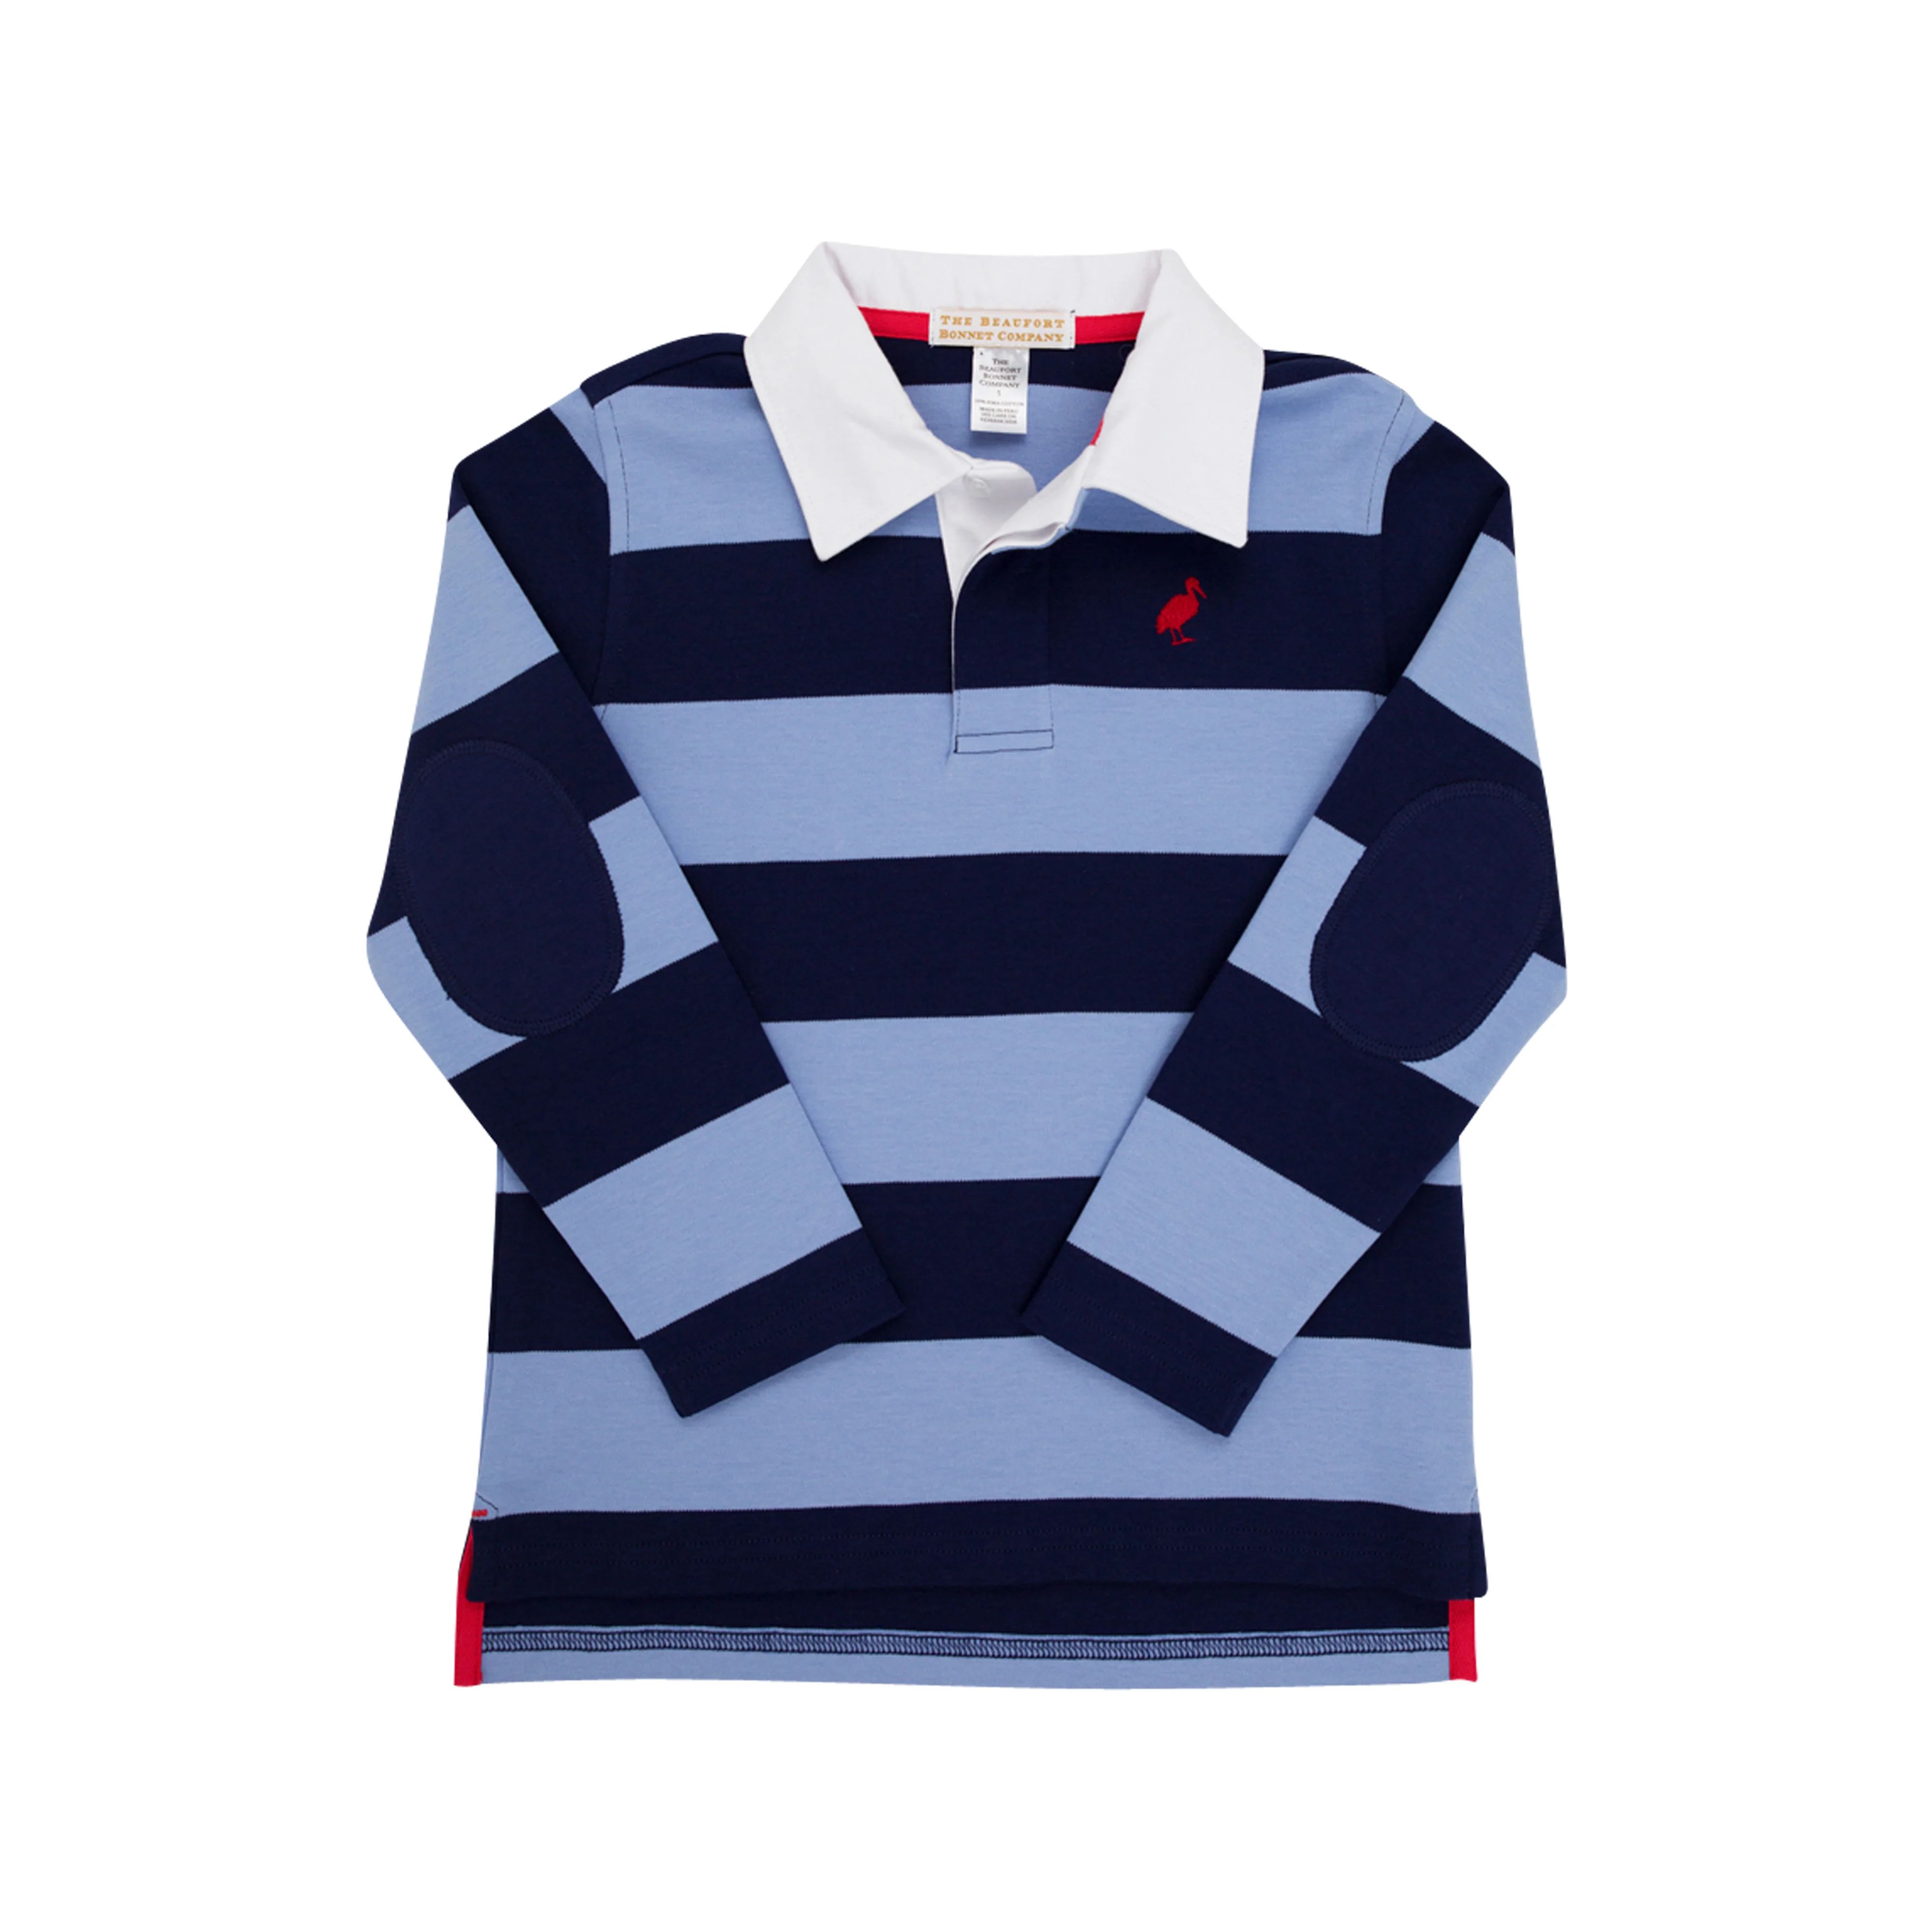 Rollins Rugby Shirt - Nantucket Navy & Park City Periwinkle Stripe with Richmond Red Stork | The Beaufort Bonnet Company